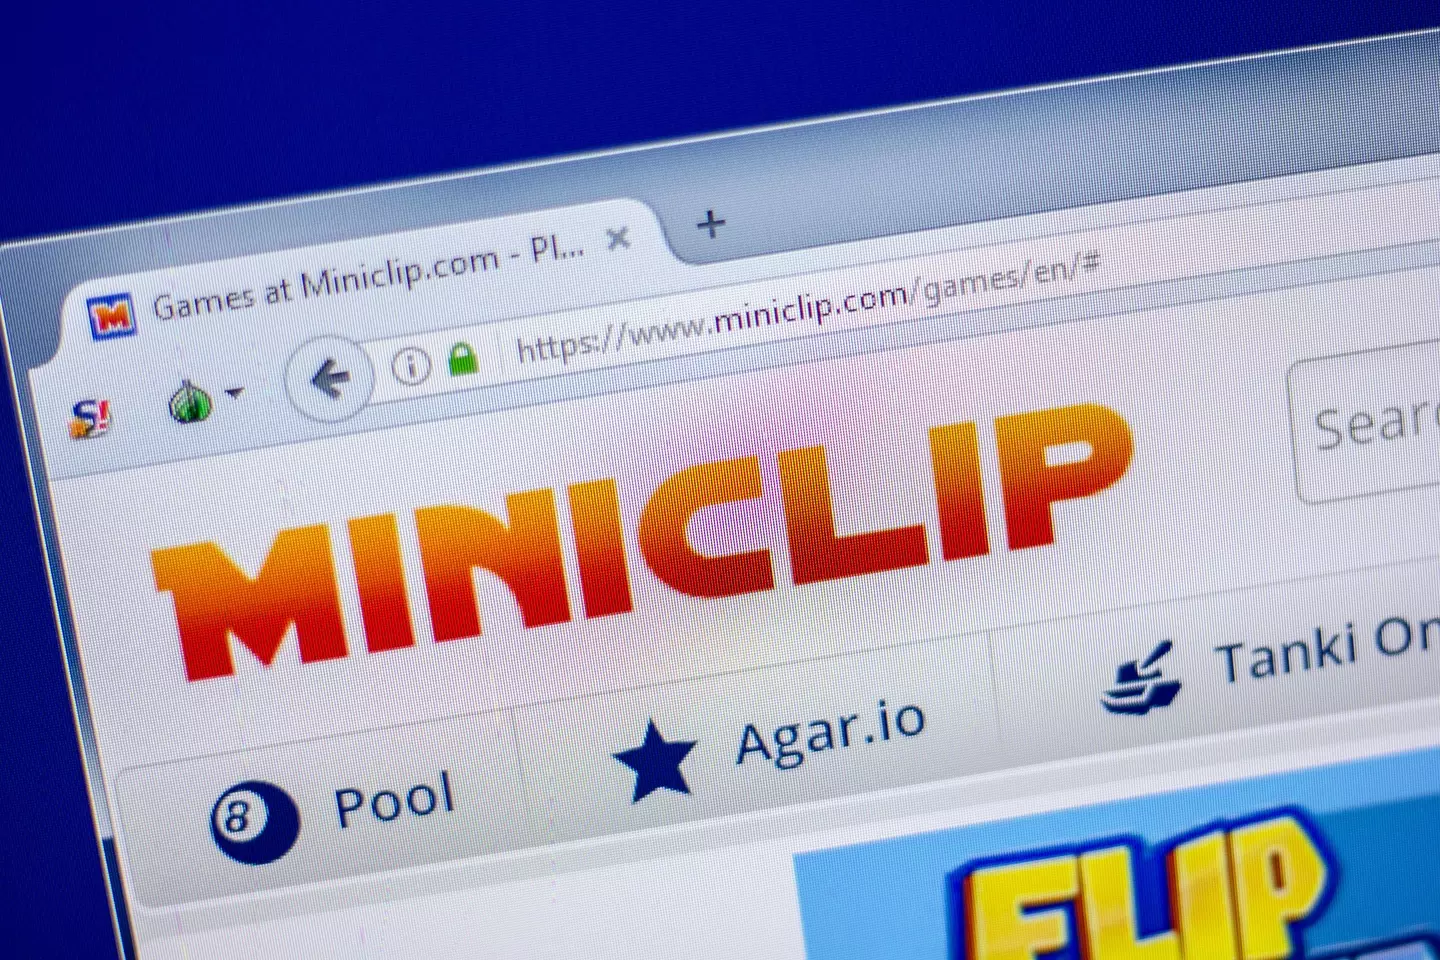 Goodbye Miniclip, you were a real one.